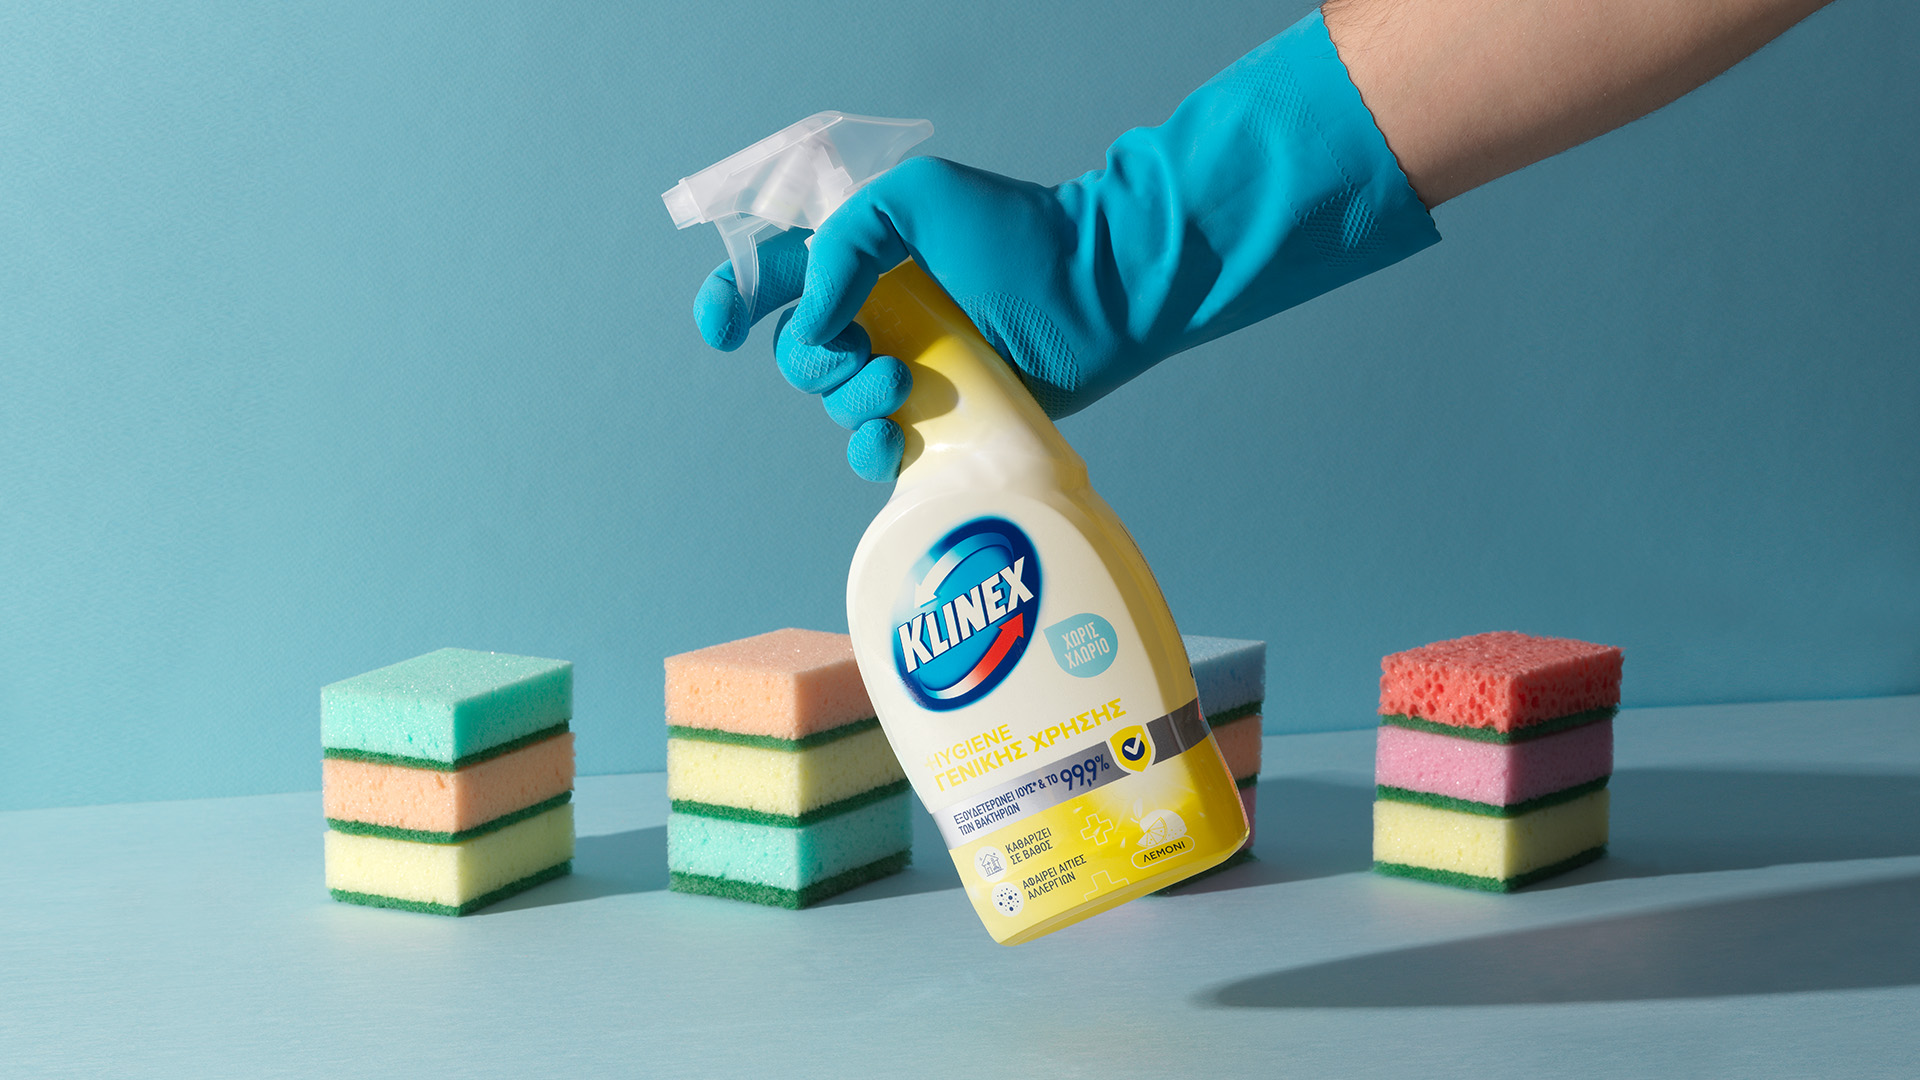 A Market-Leading Hygiene Brand Responds to the Demands of the Covid Era